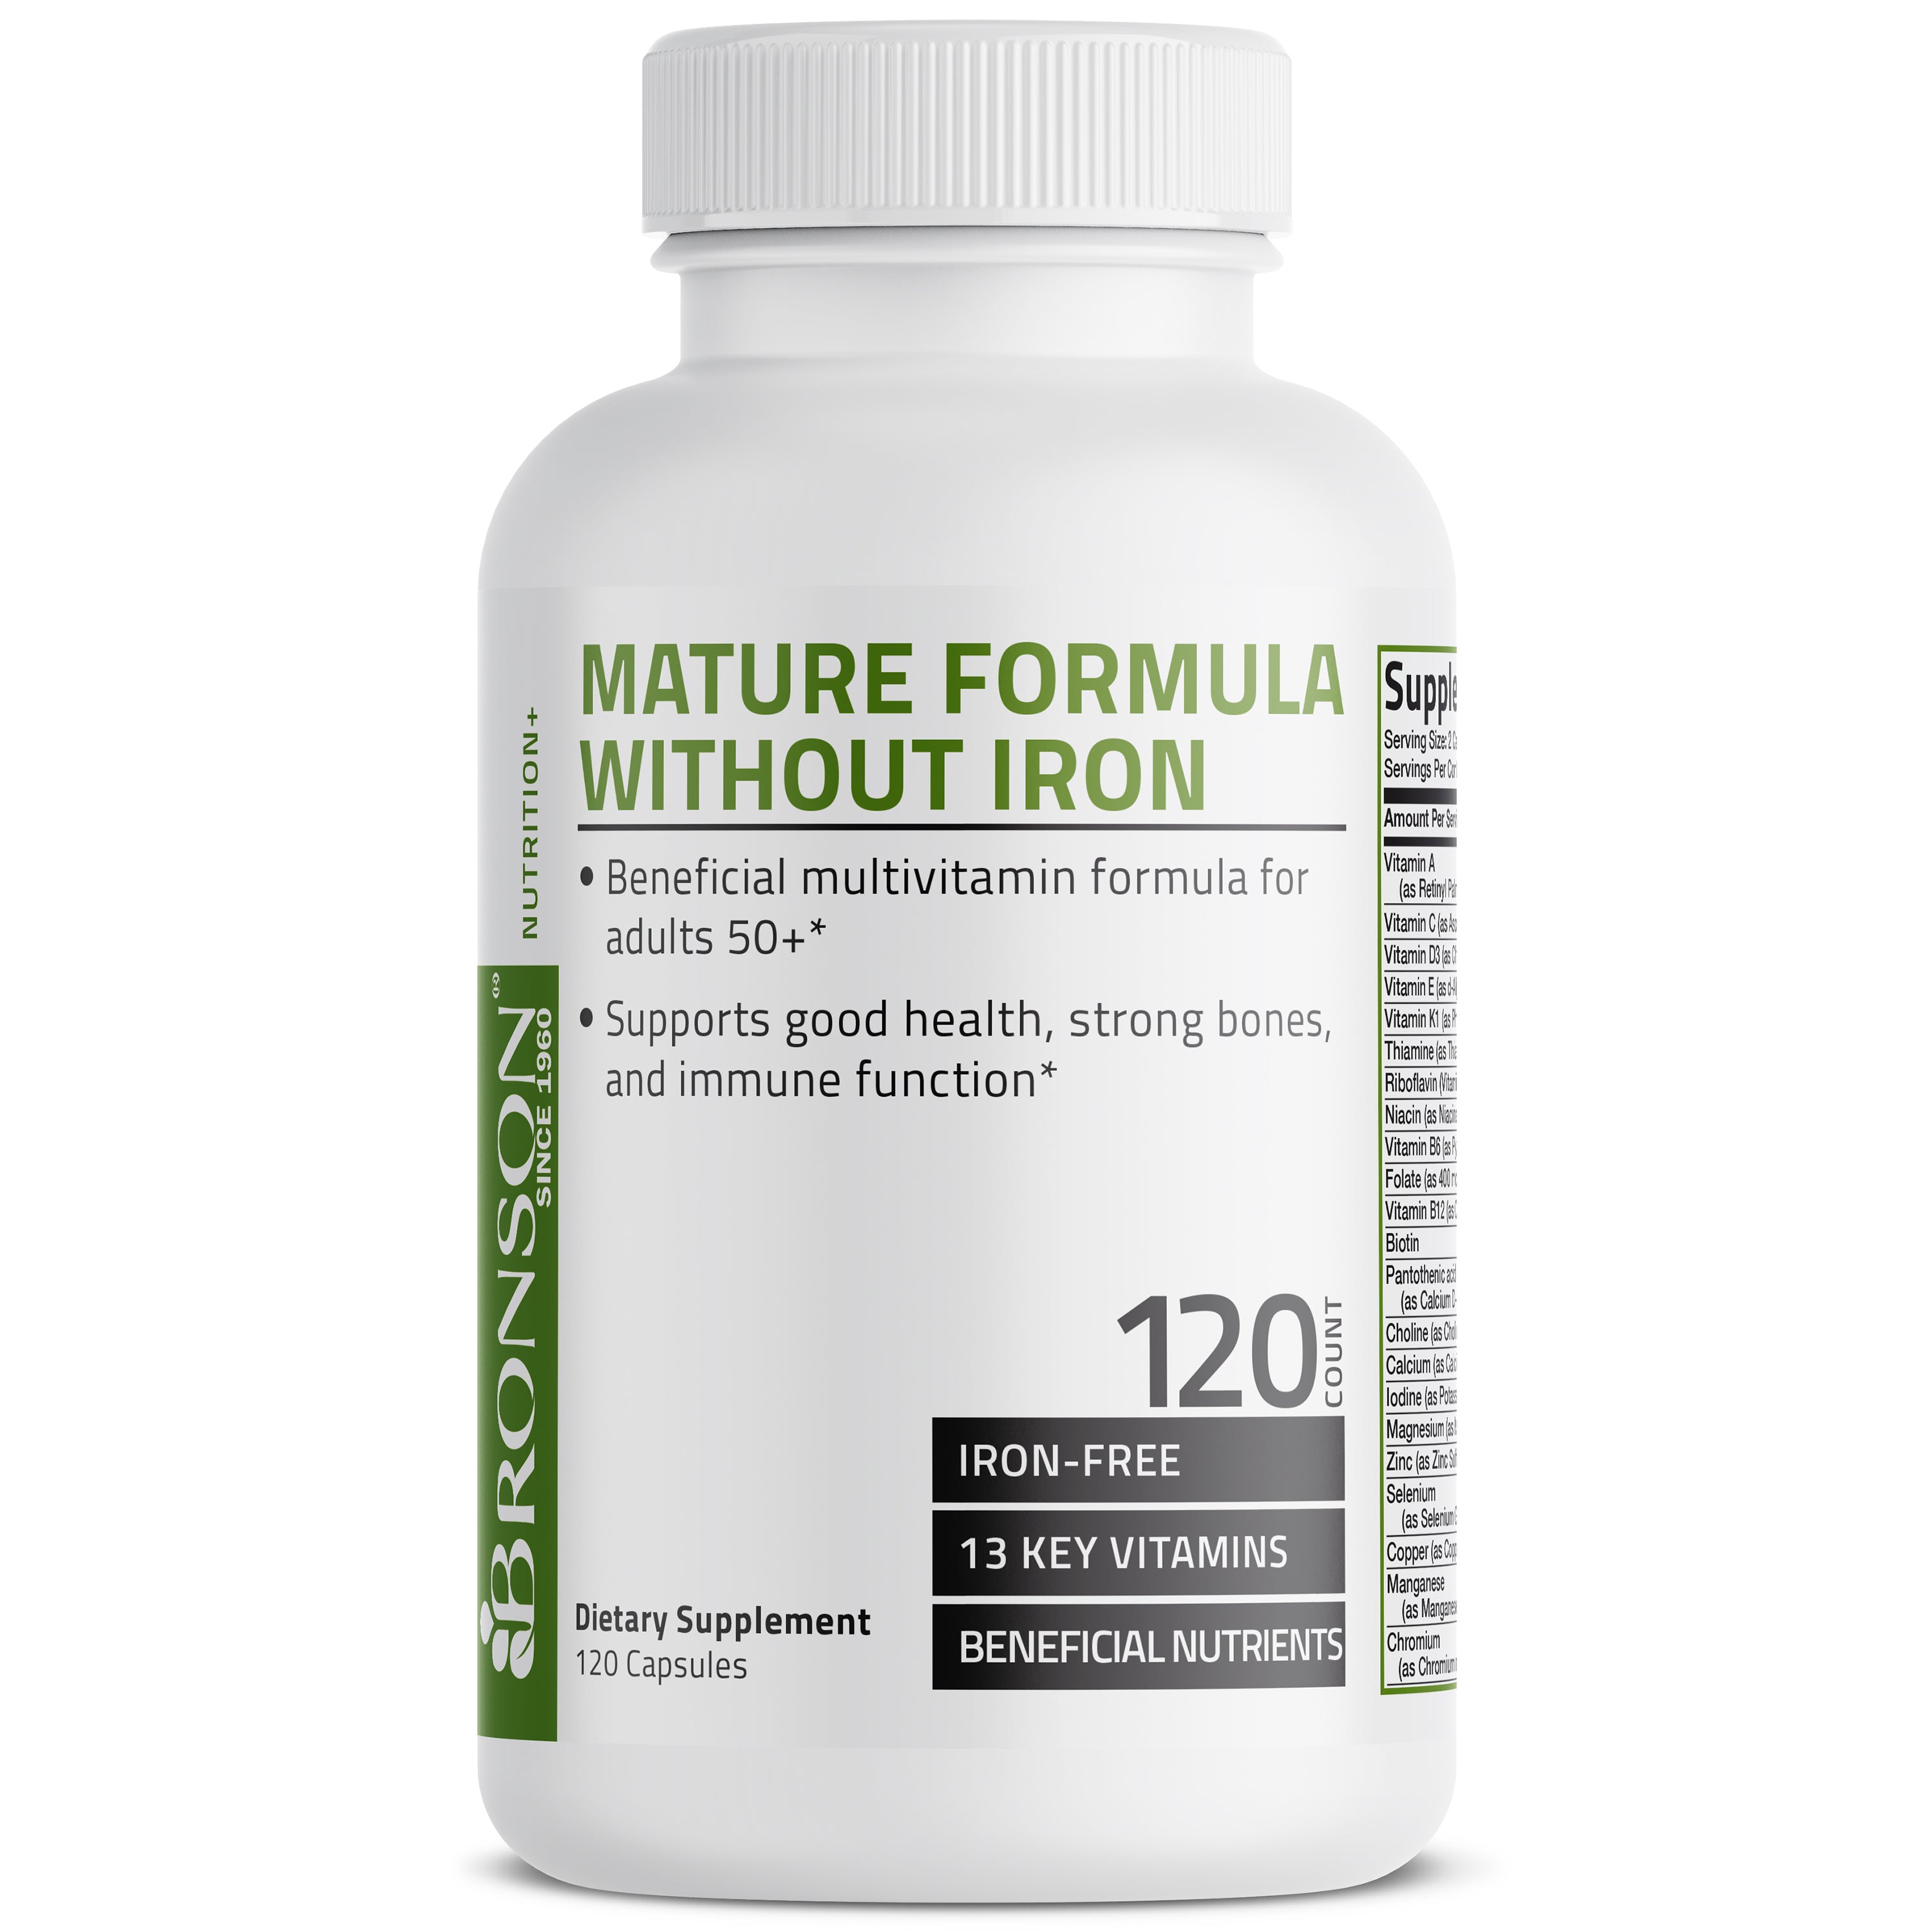 Mature Formula Multivitamin without Iron for Adults Over 50, 120 Capsules